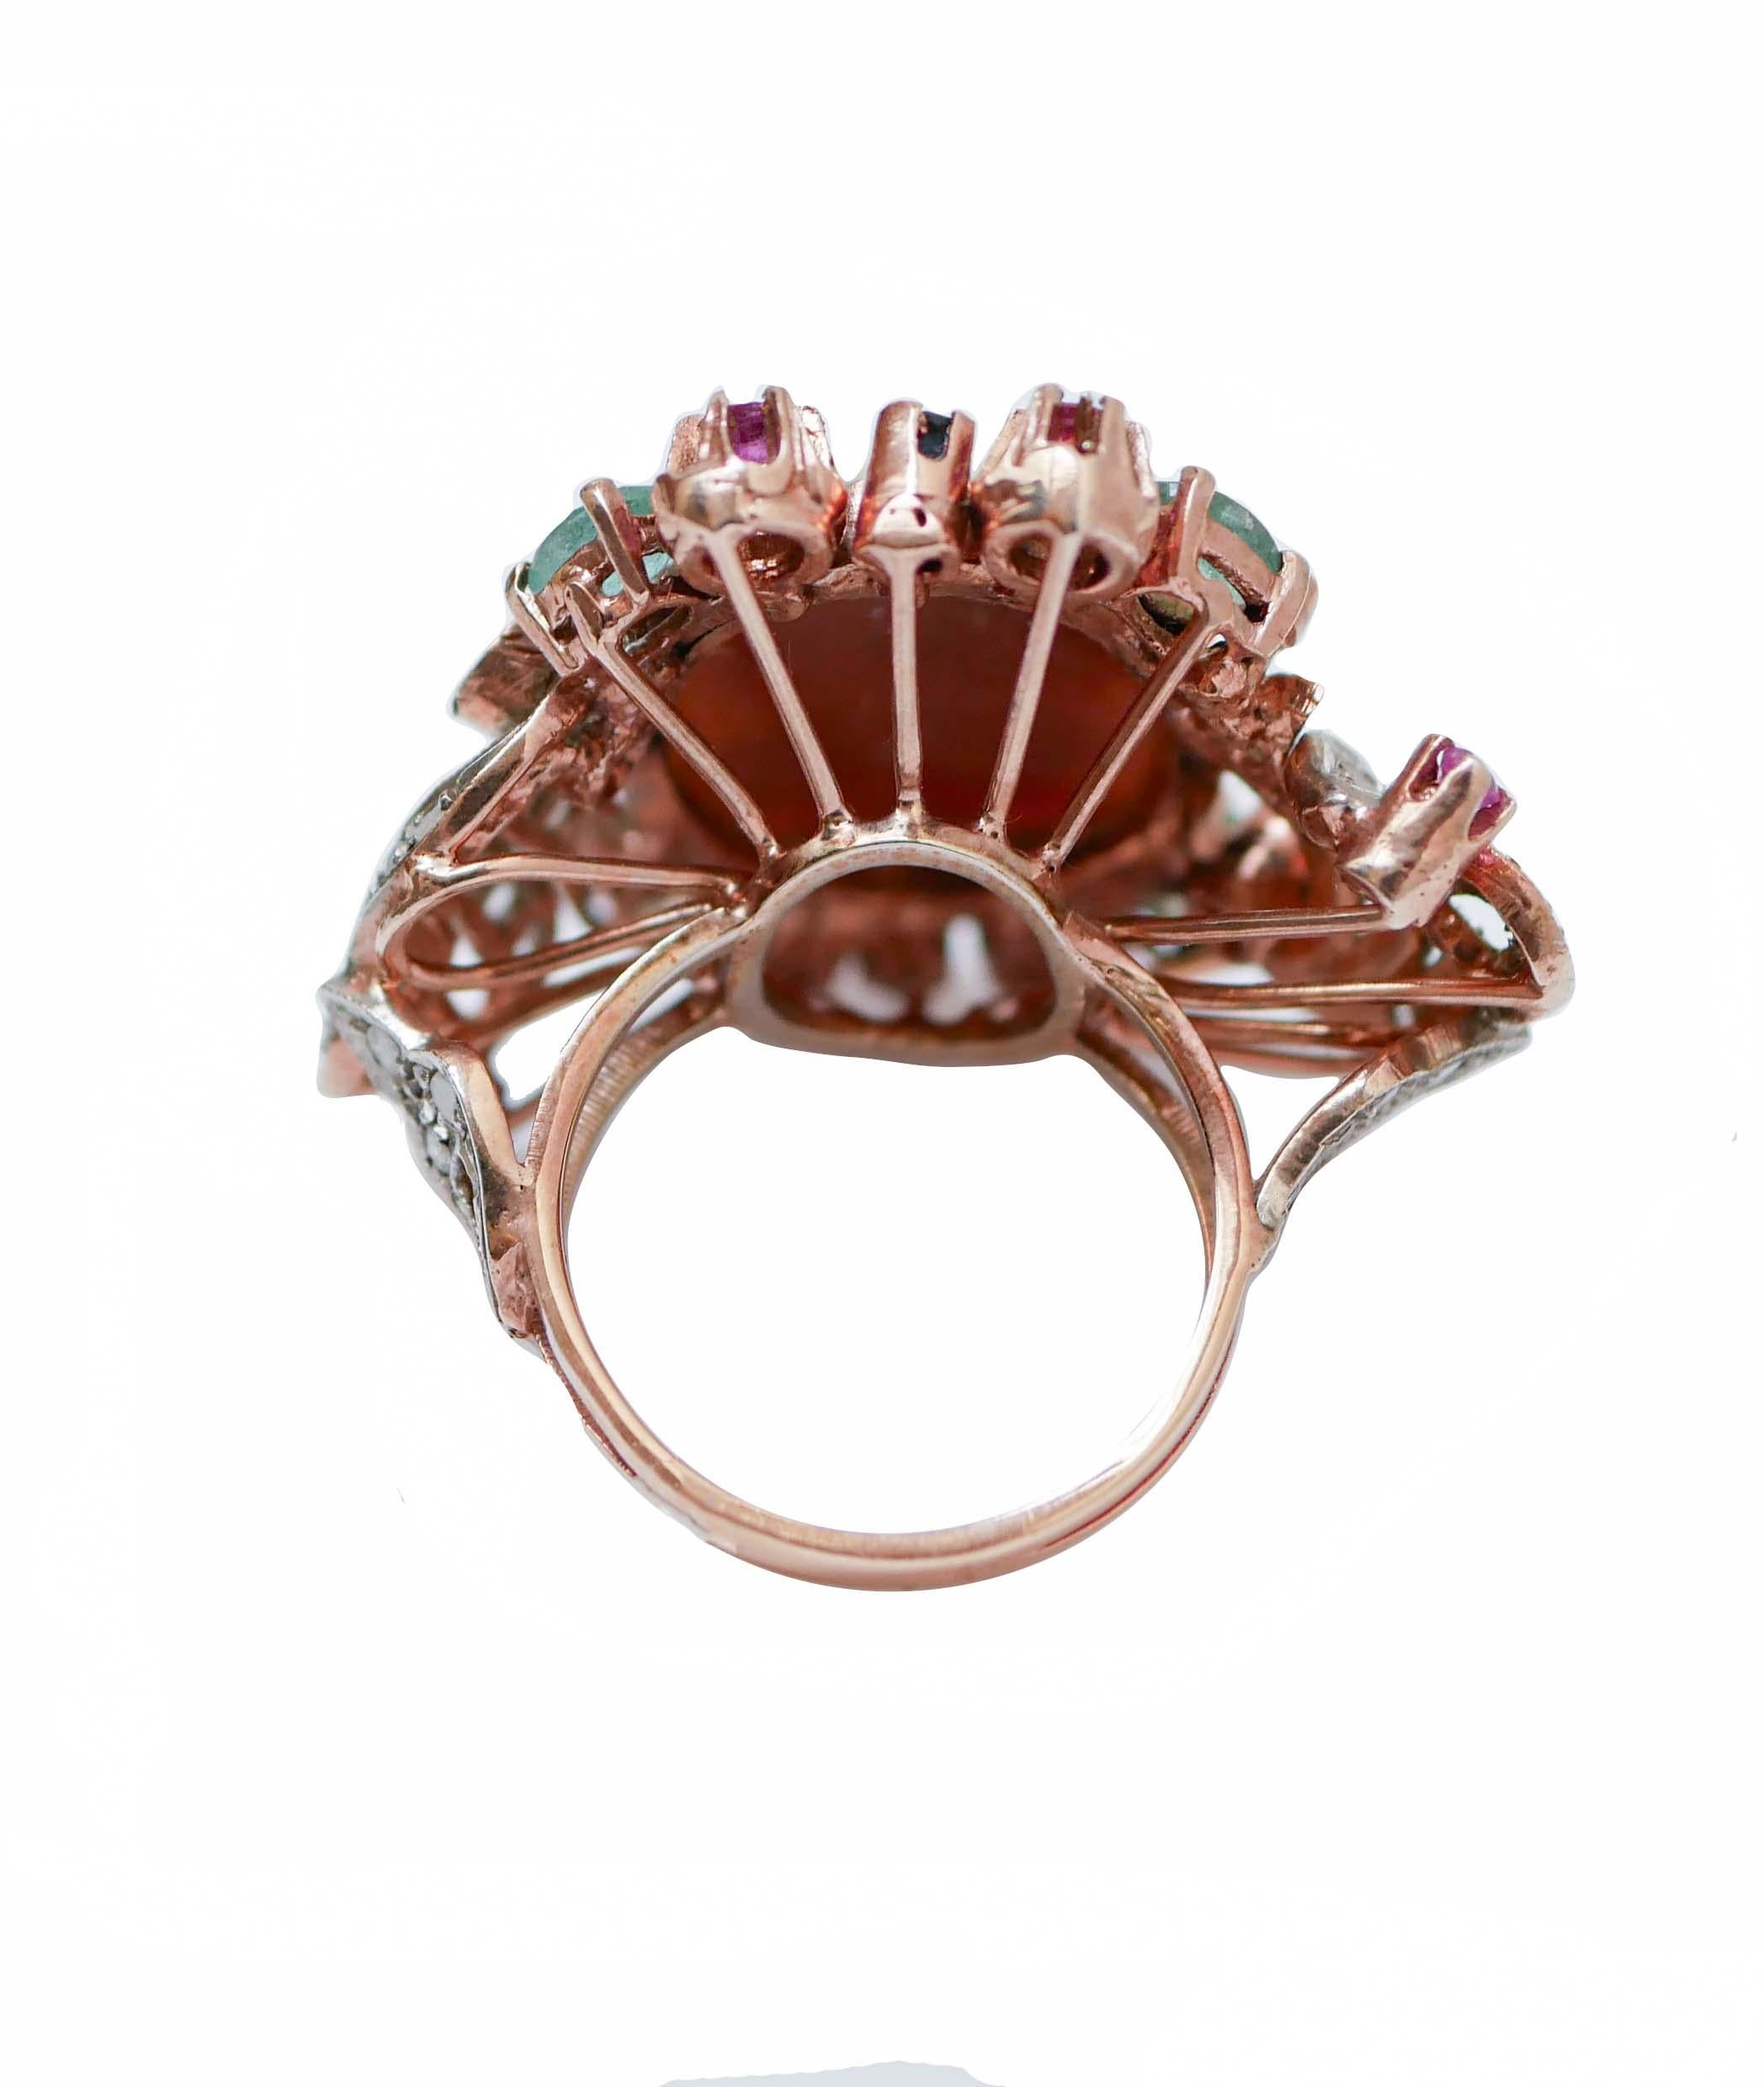 Retro Cameo, Emeralds, Rubies, Sapphires, Diamonds, 14 Karat Rose Gold and Silver Ring For Sale